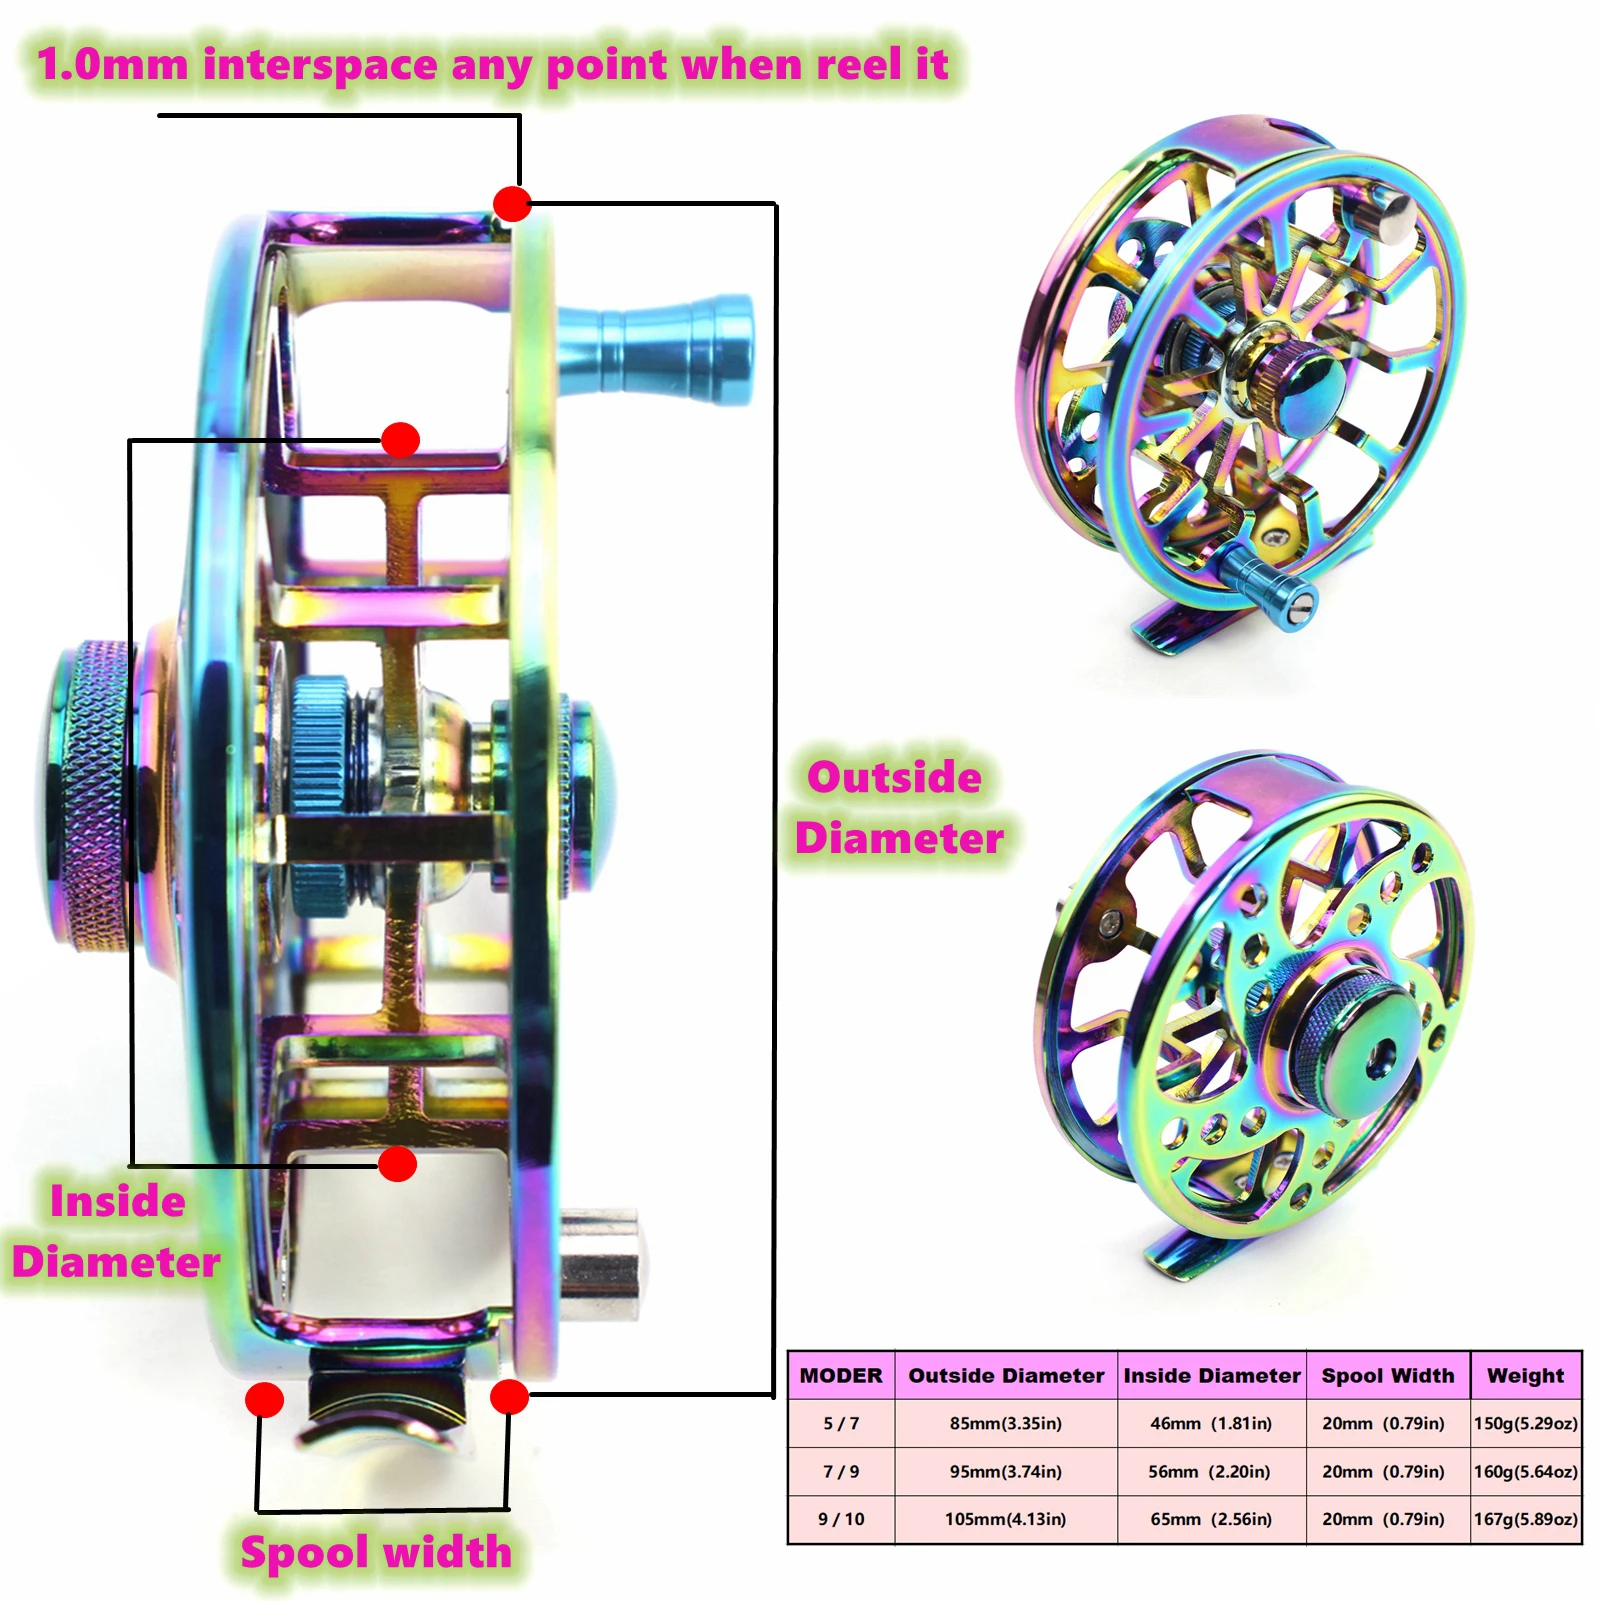 NEW Colorful Fly Fishing Wheel 5/7 7/9 9/10 WT Fly Reel CNC